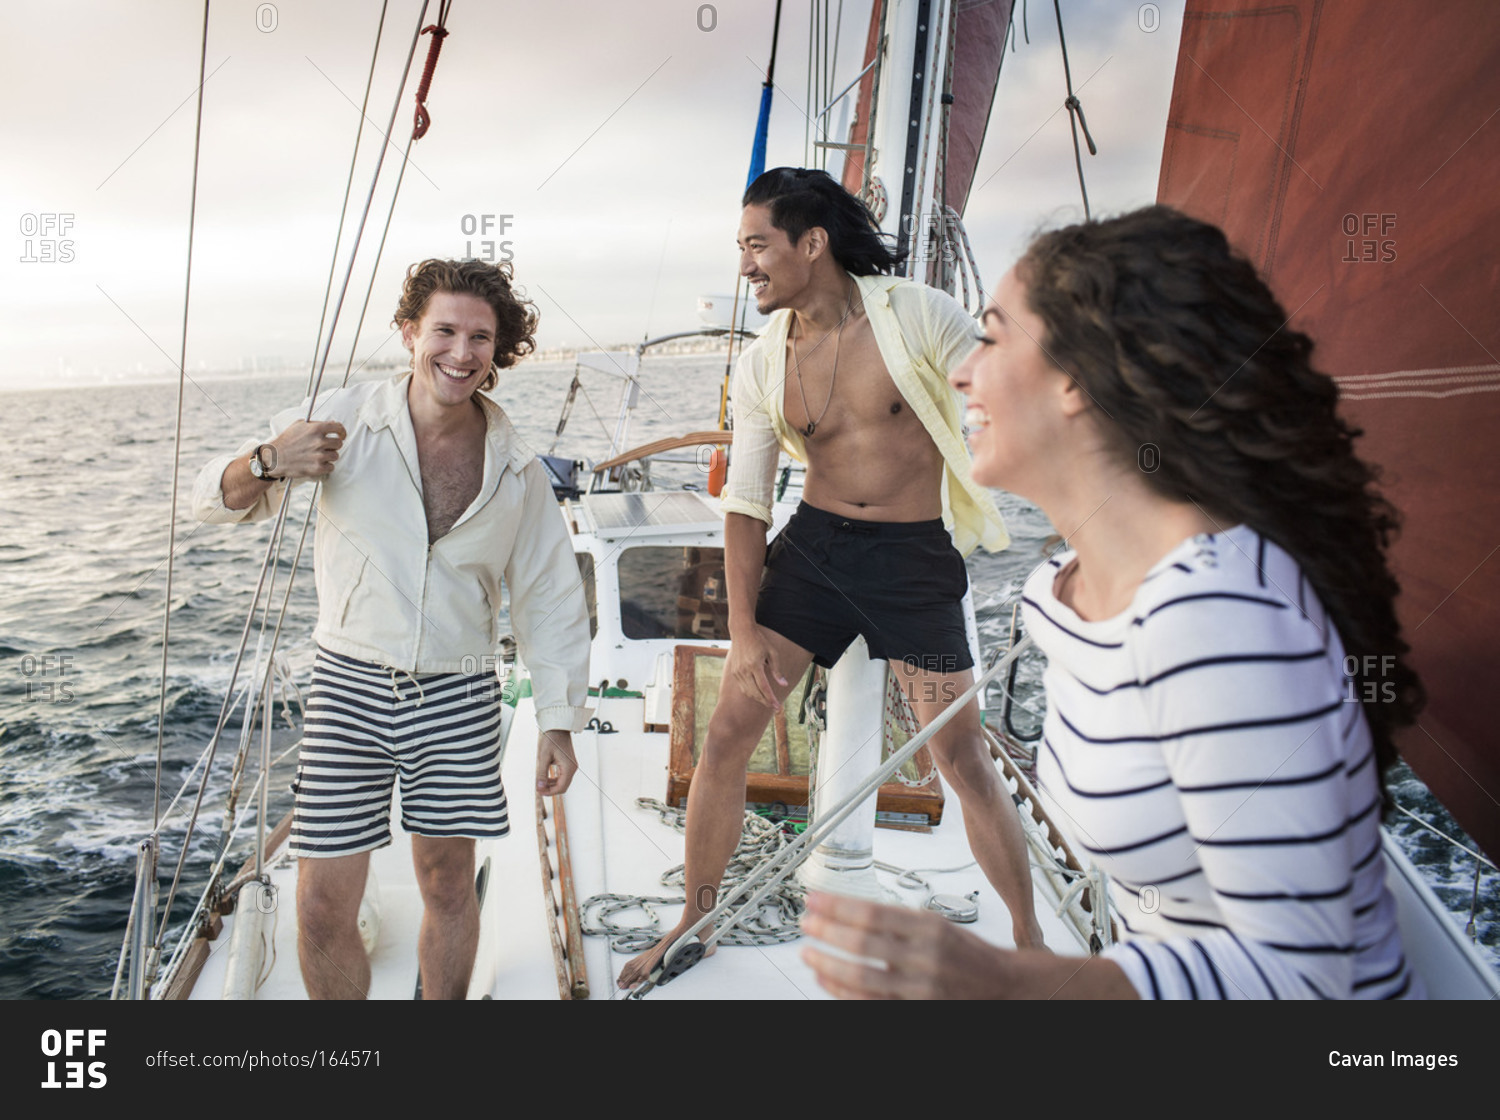 Friends enjoy themselves on a sailboat